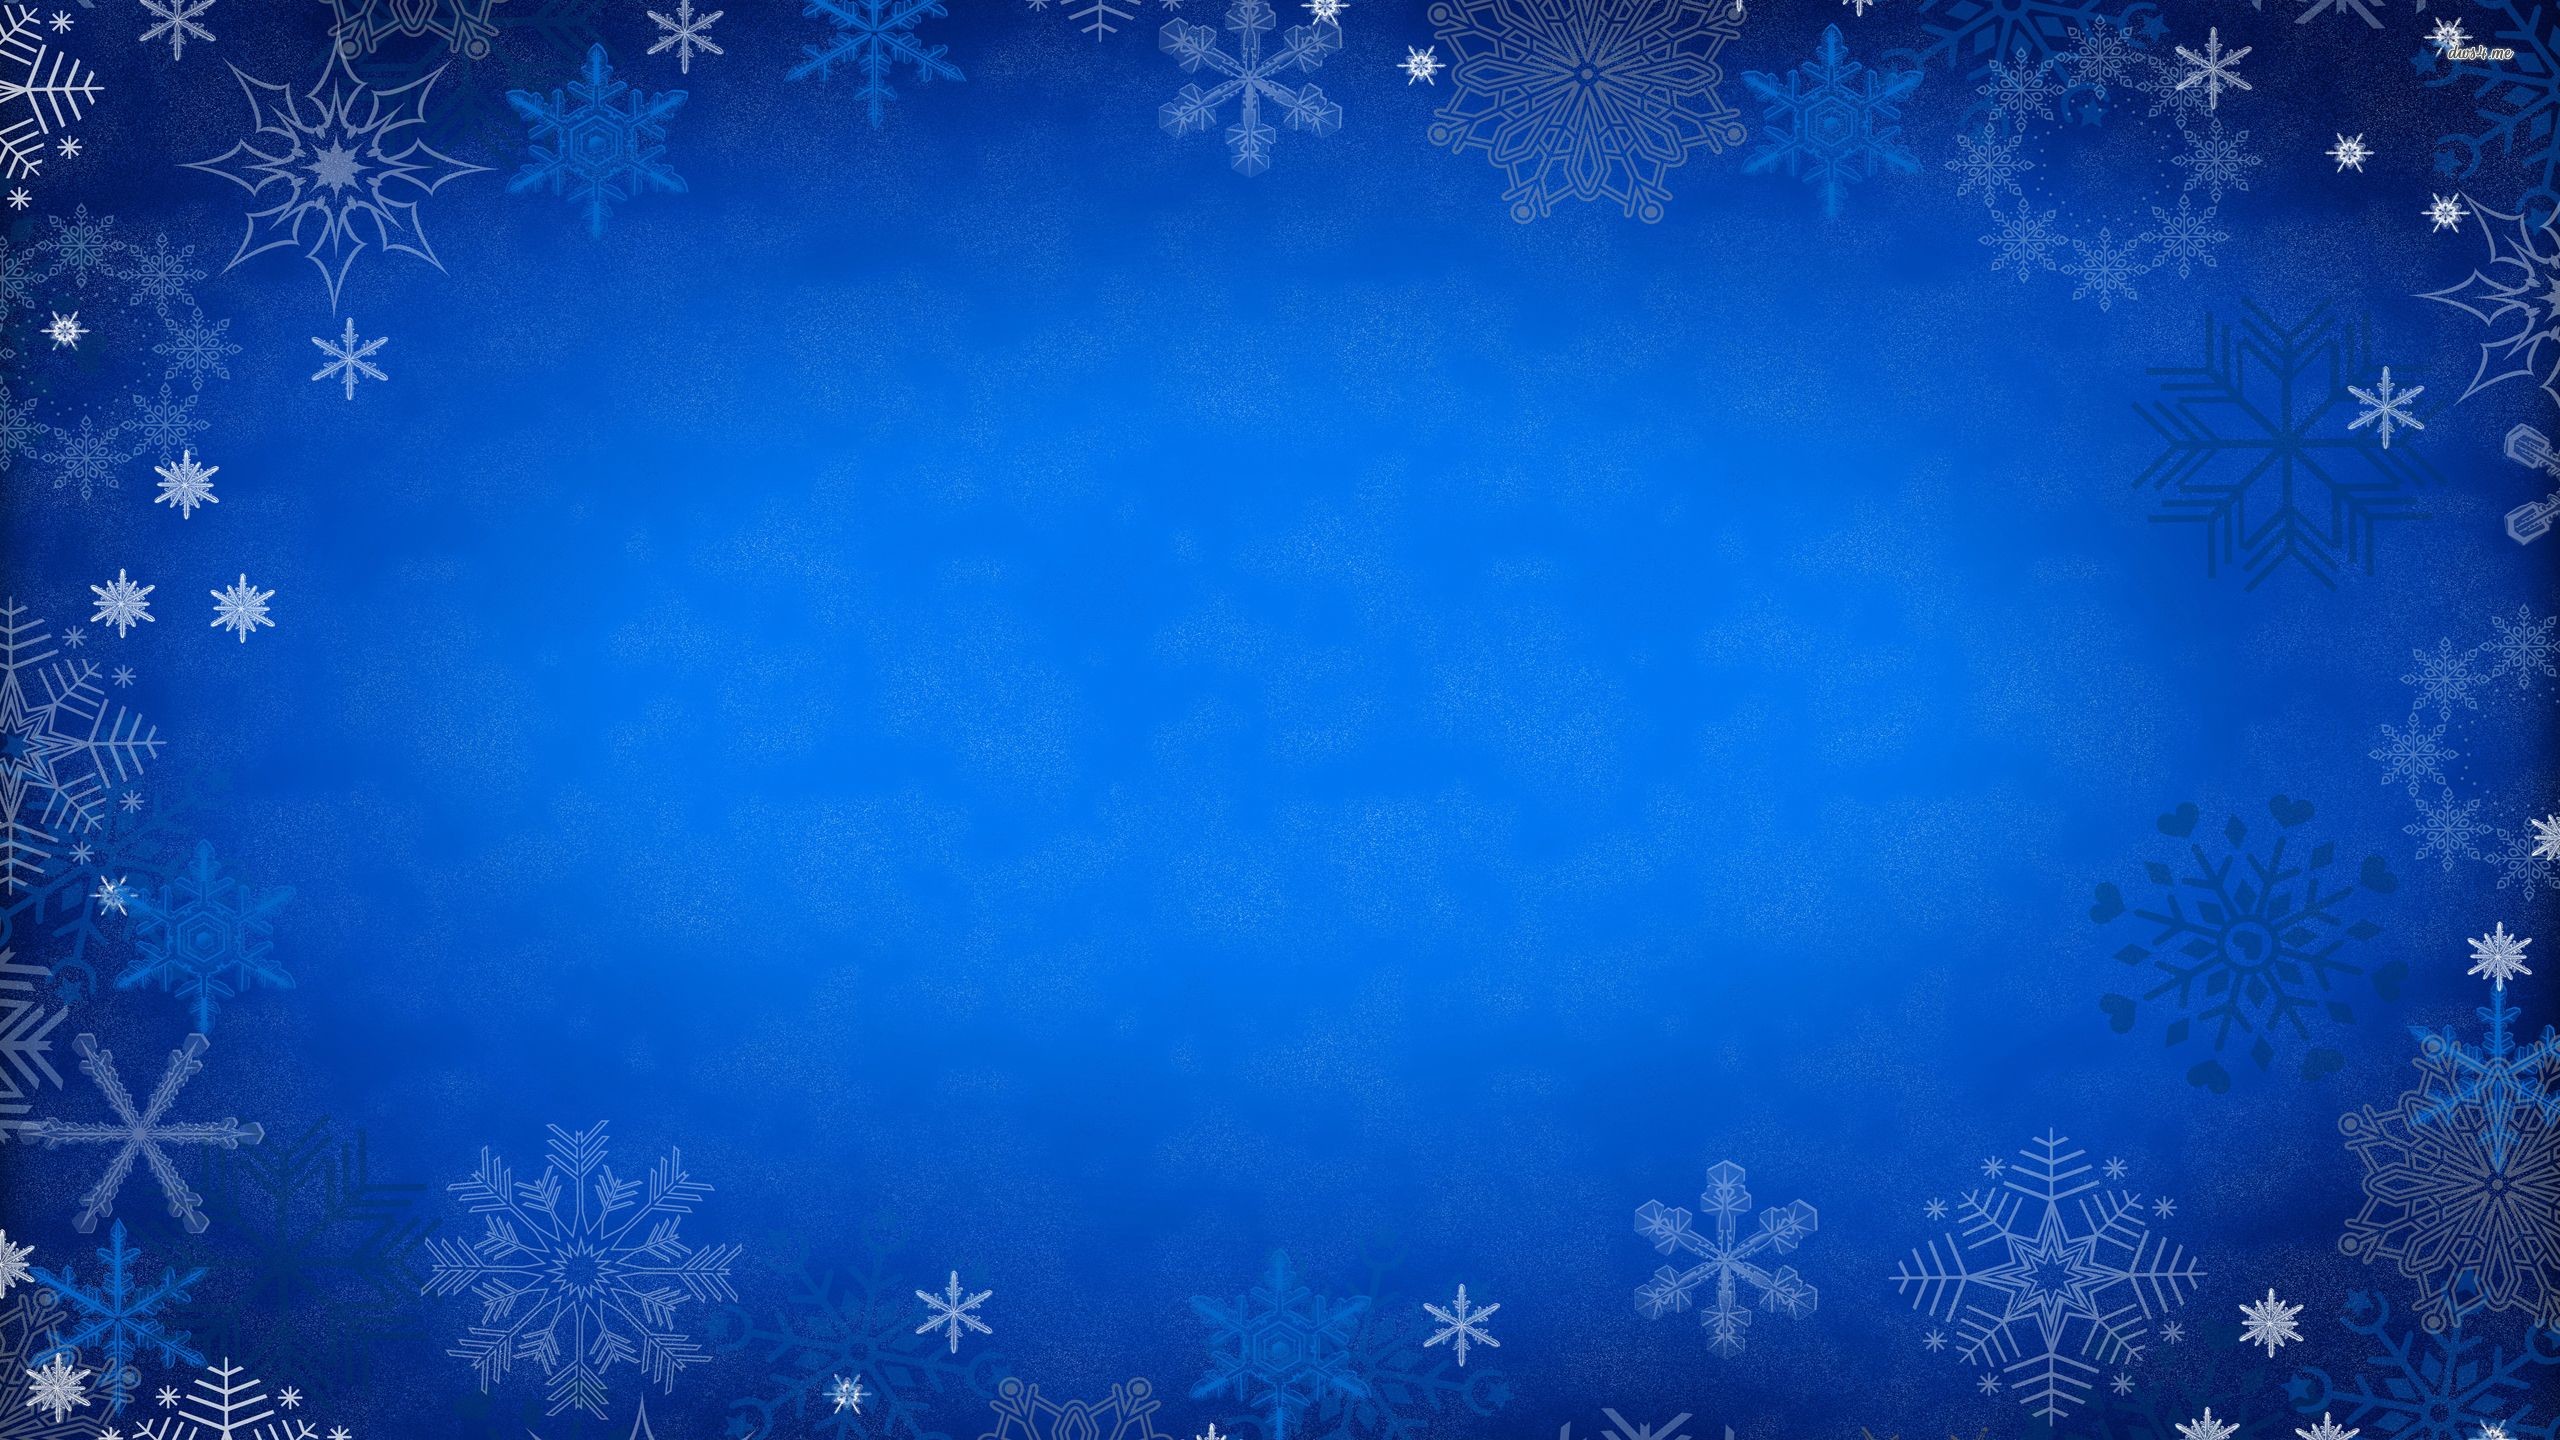 2560x1440 Blue snowflakes wallpaper - Holiday wallpapers - #48610